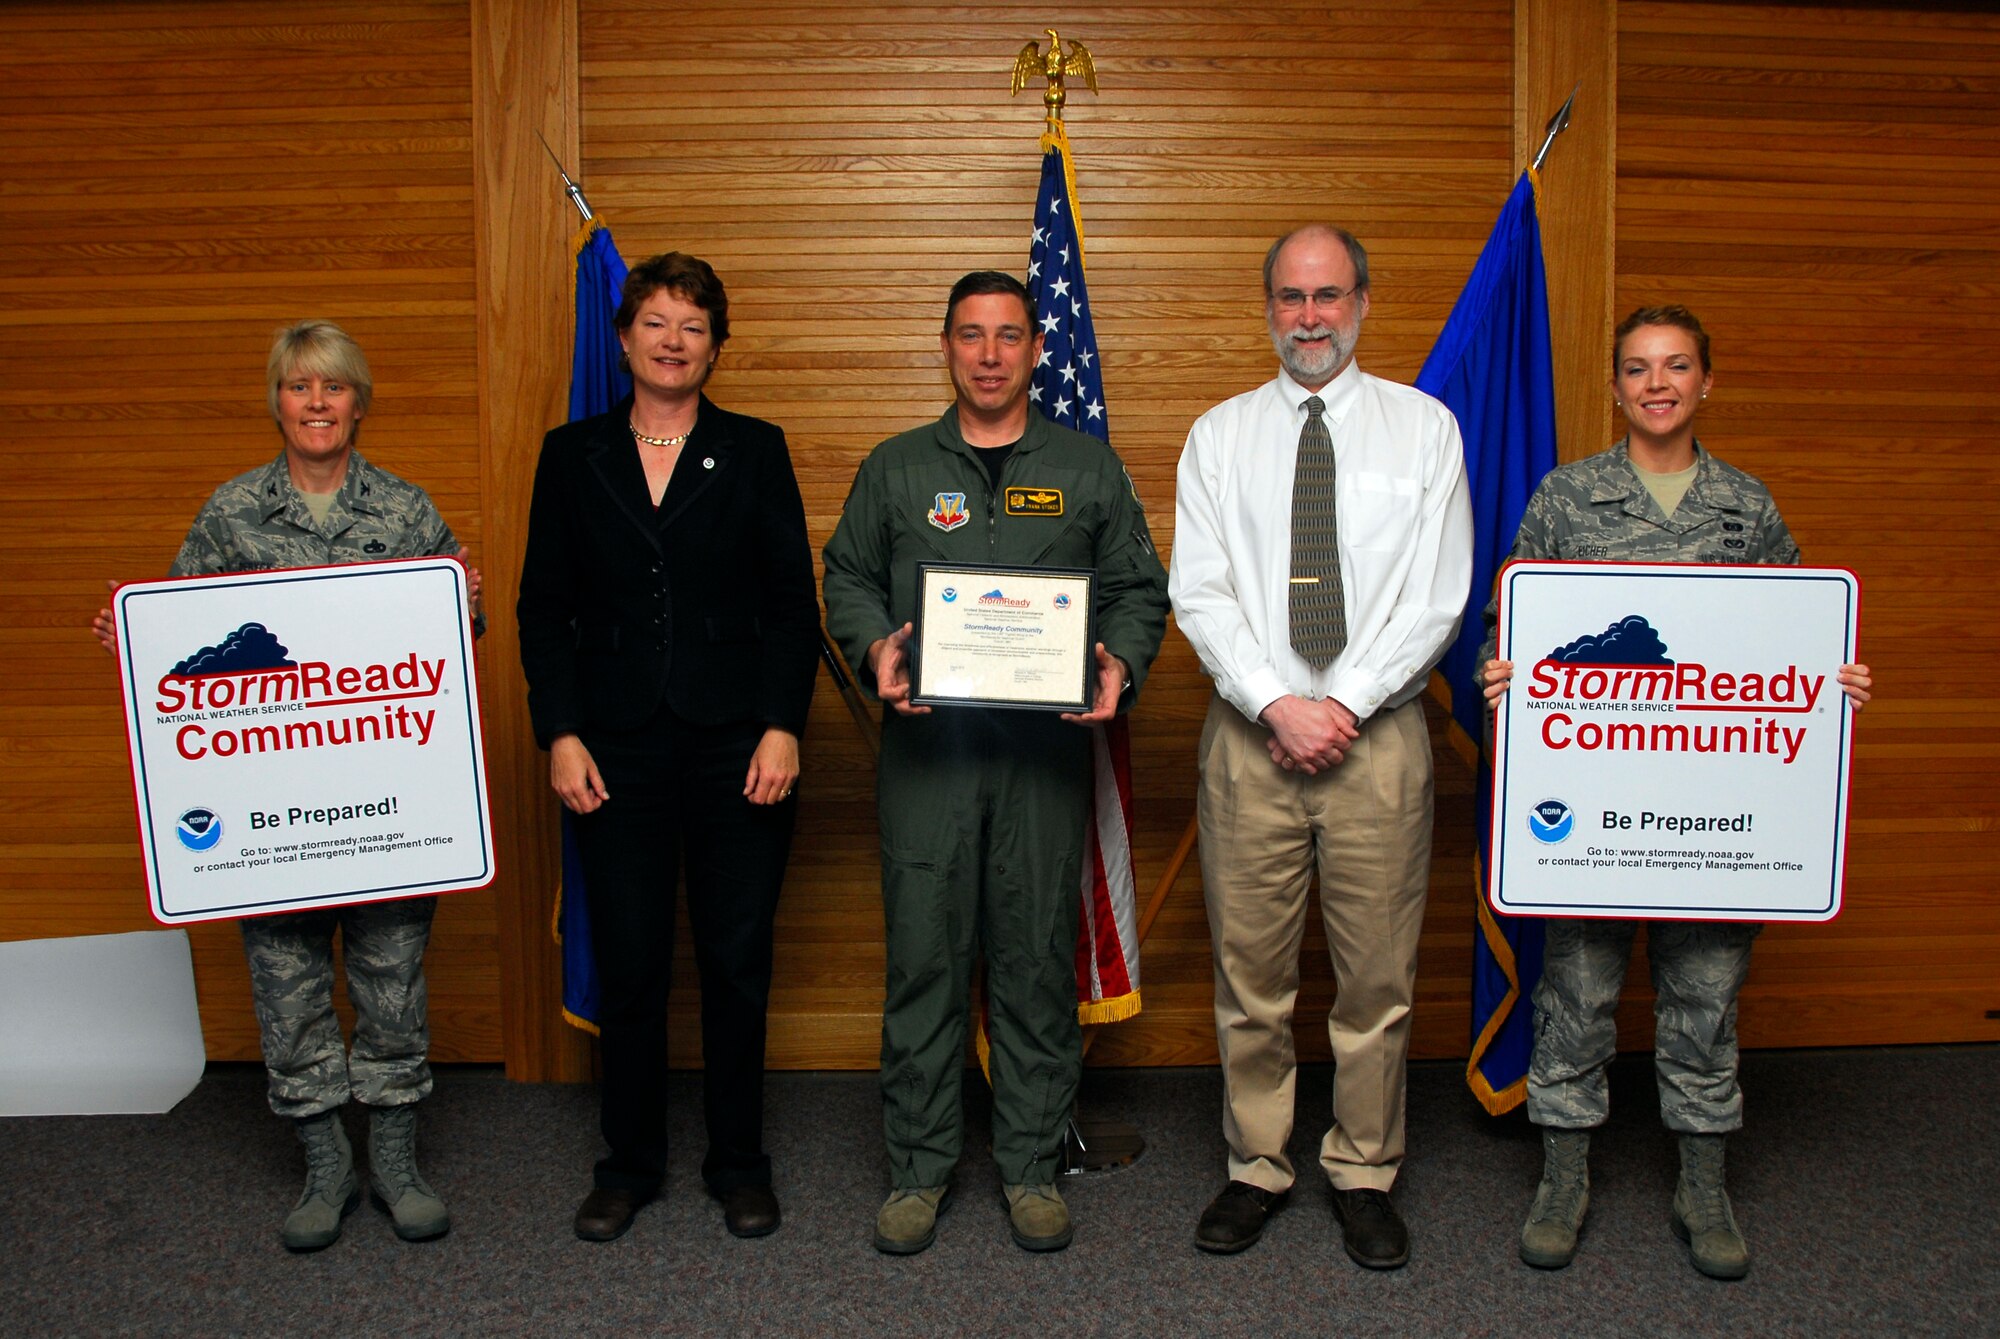 Mr. Michael R. Stewart, meteorologist in charge of the Duluth, Minn., National Weather Service (right center) presents the  148th Fighter Wing with certification as a StormReady Community at the Duluth, Minn., ANG Base May 3, 2010.  The 148th Fighter Wing has become the first National Guard unit to be certified by the National Weather Service as a StormReady Community. (U.S. Air Force photo by Master Sgt. Jason W. Rolfe/Released)